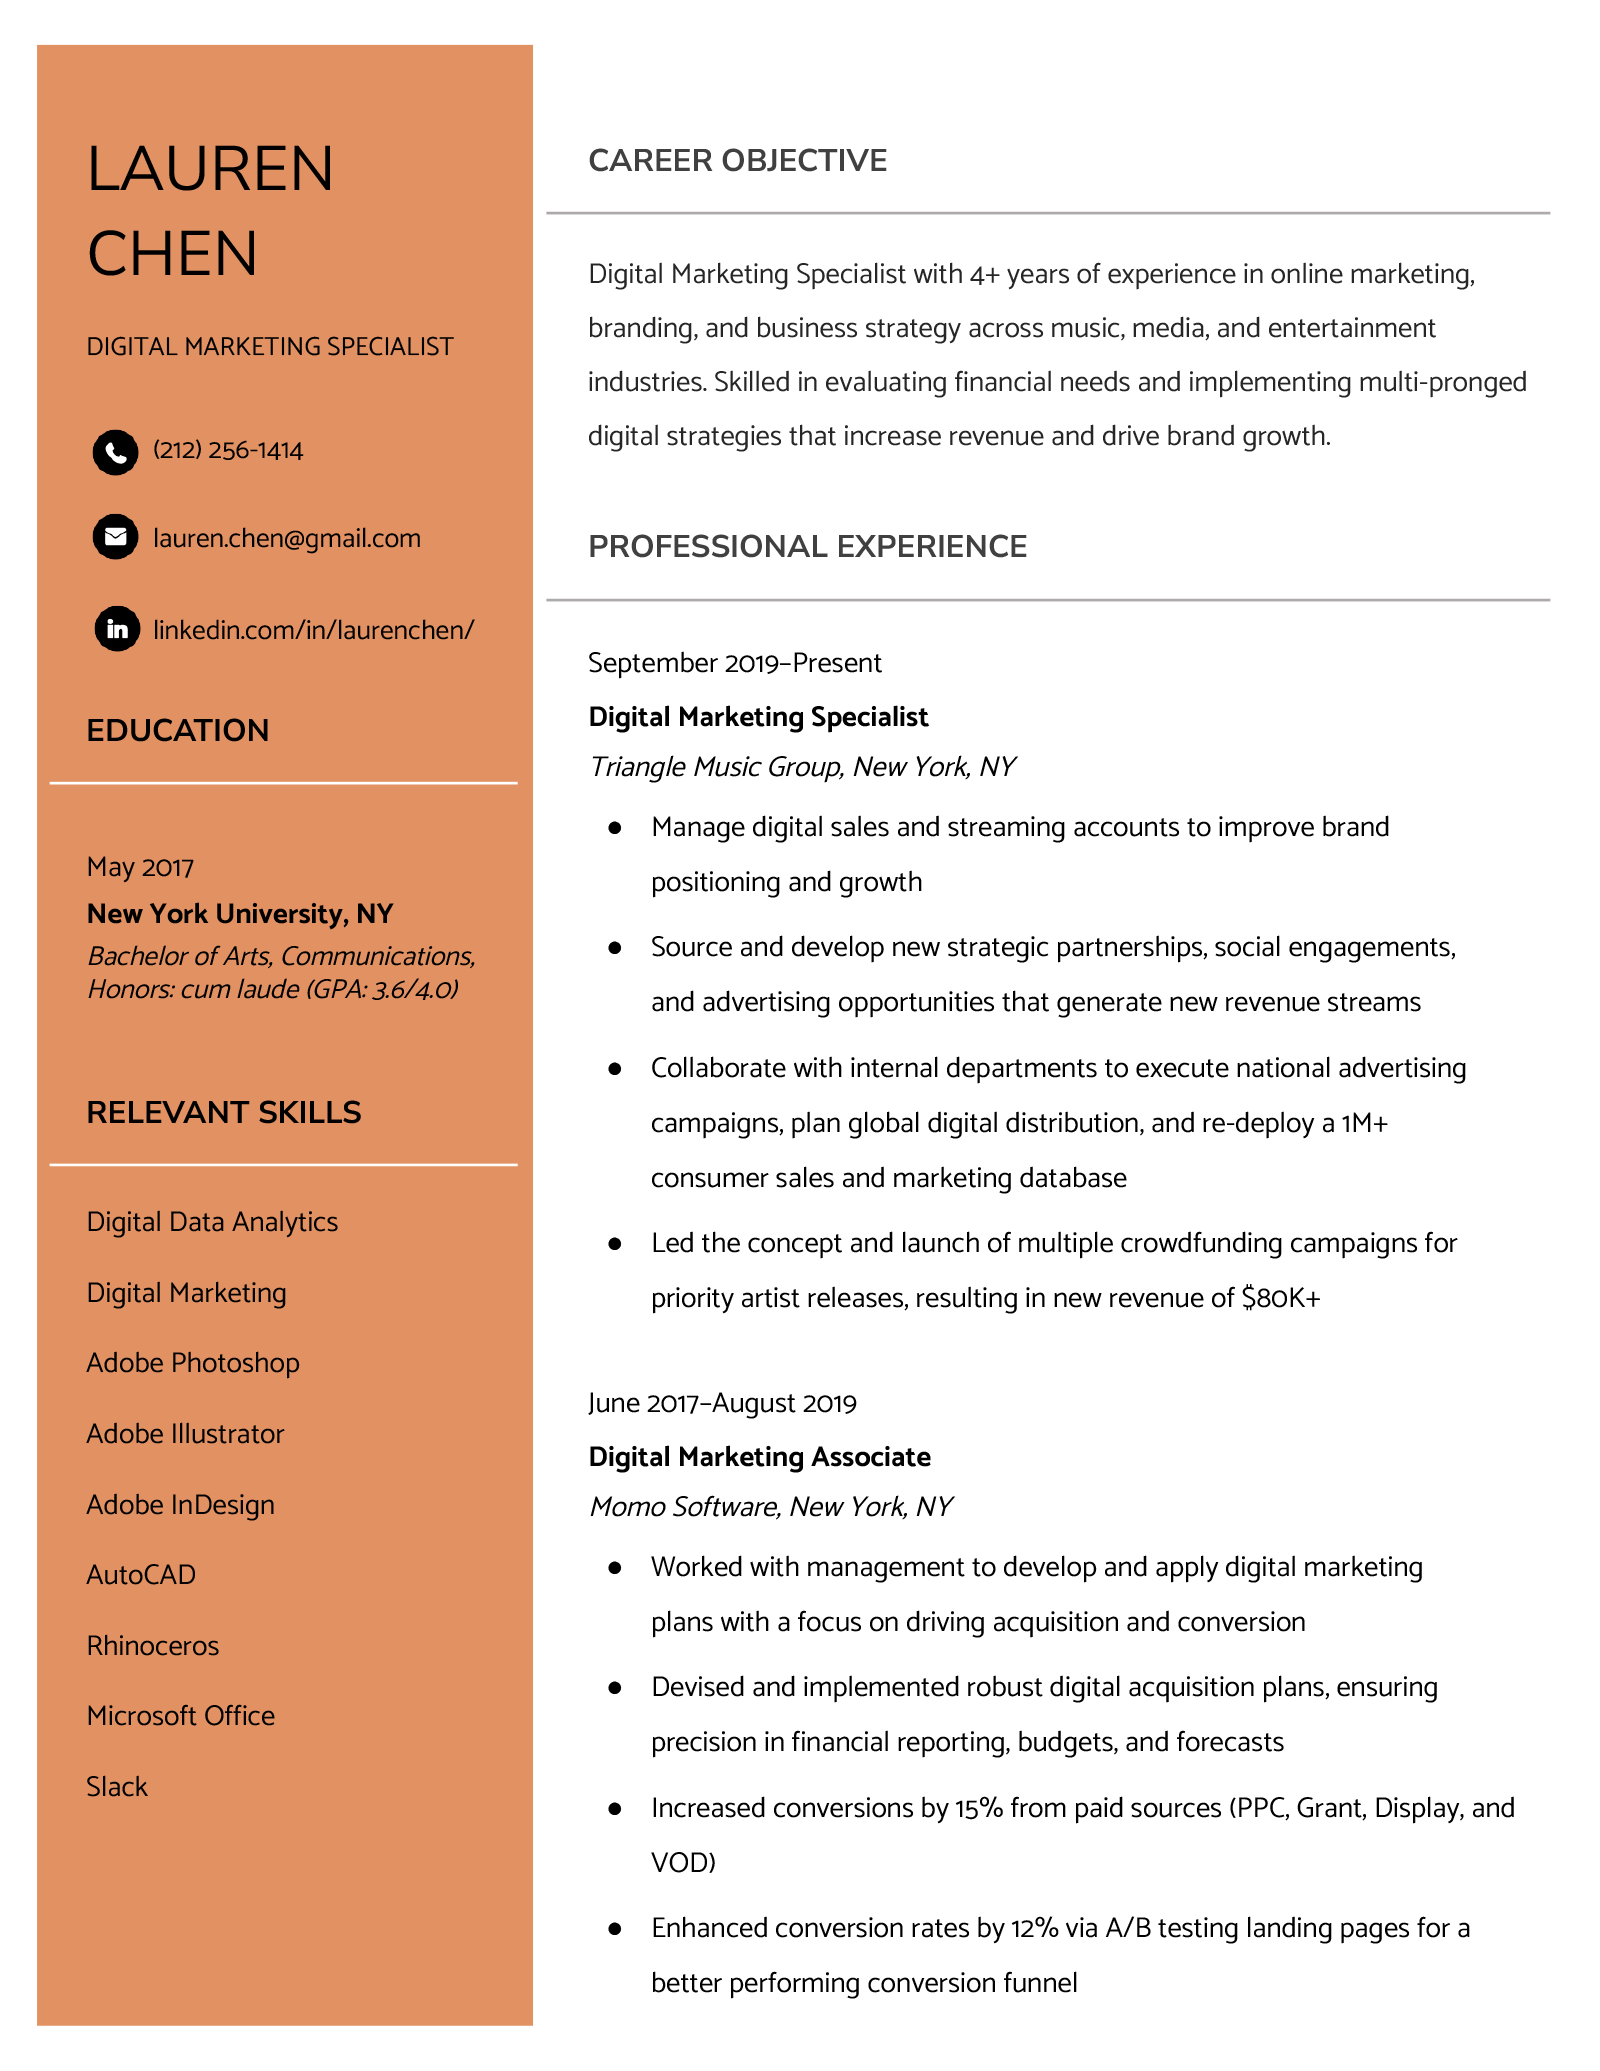 Example of a resume that uses one strong resume color.